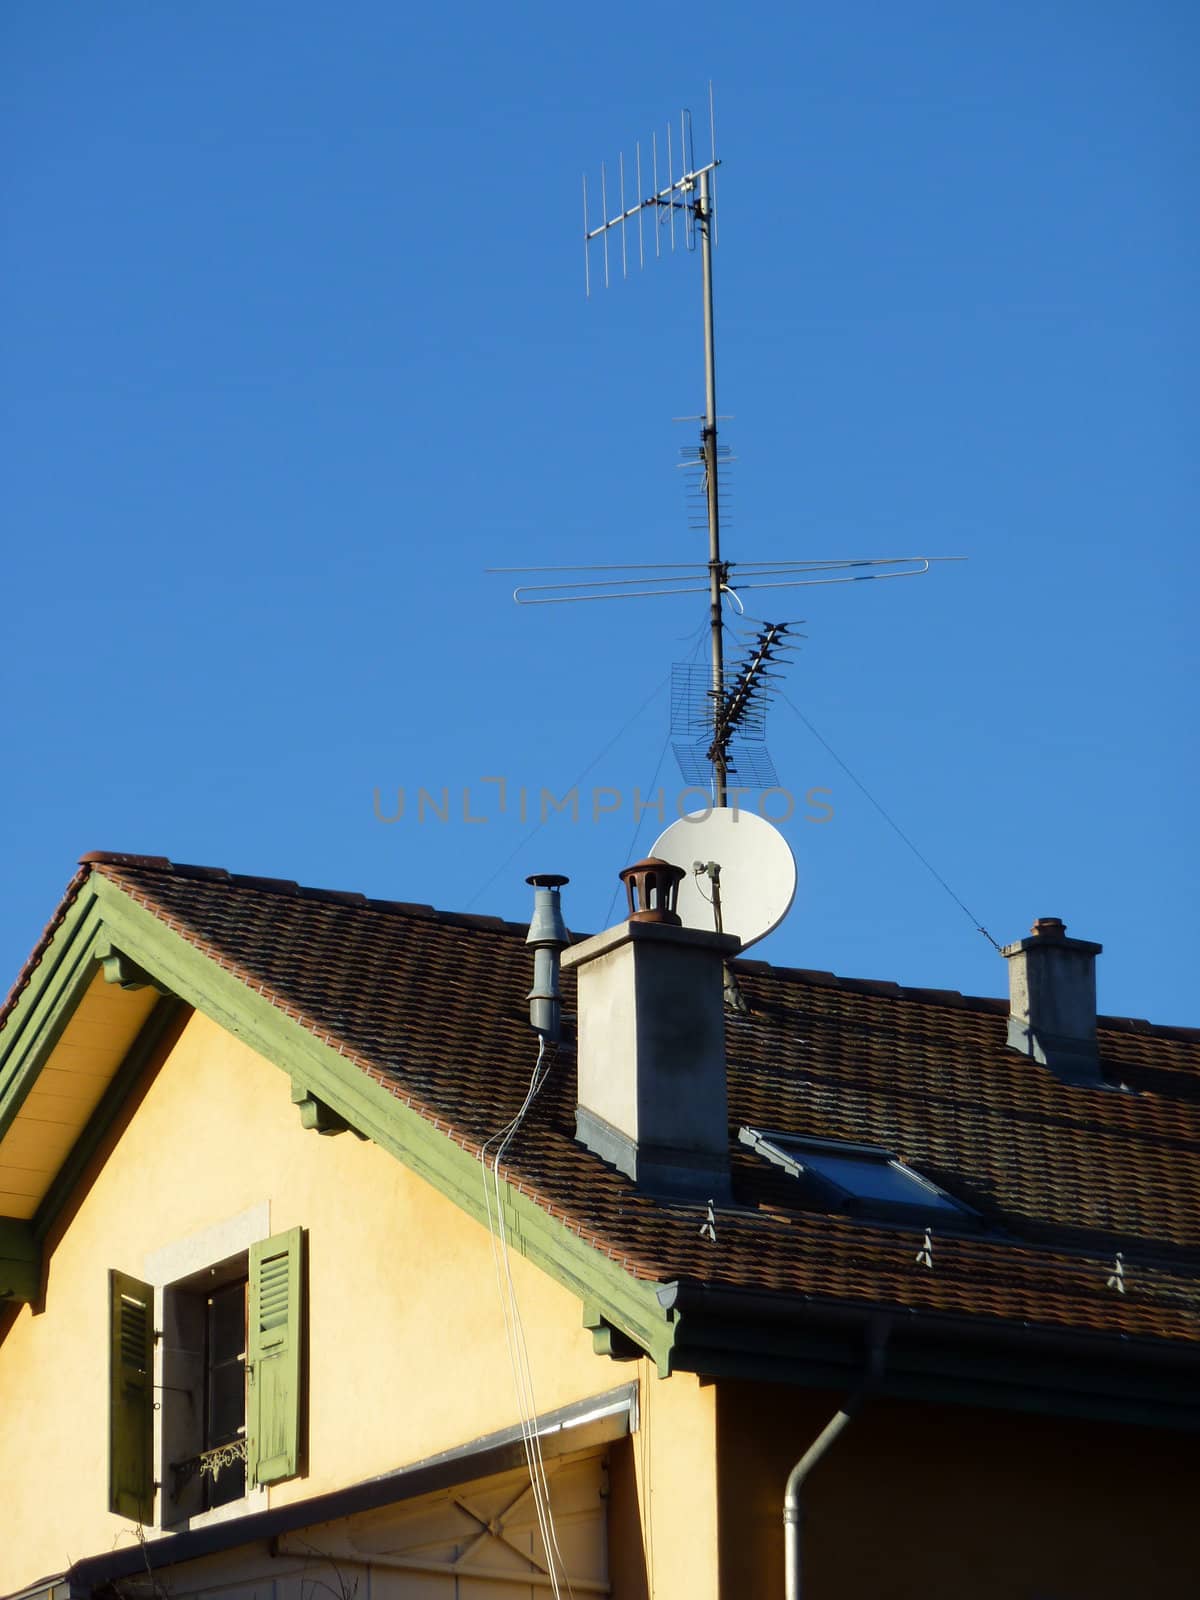 Antenna on a roof by Elenaphotos21